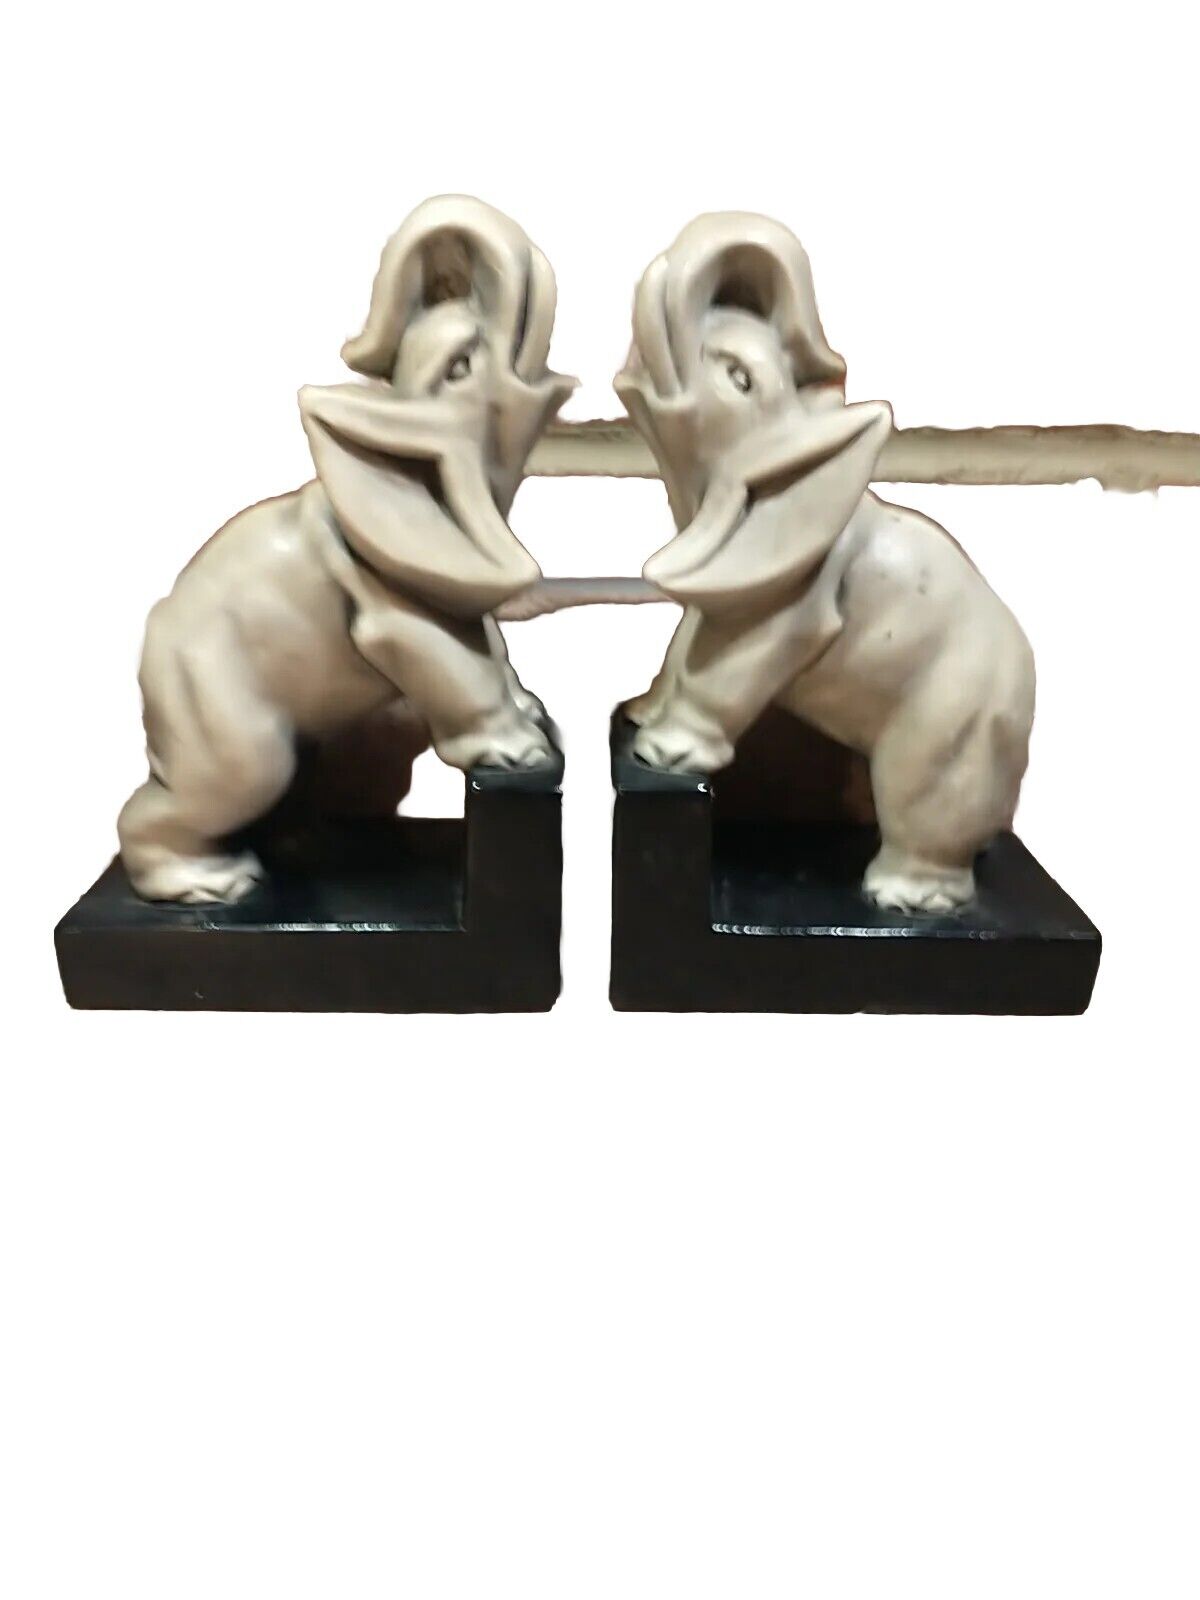 Atq Vtg Gray Trunk Up Ceramic Elephant Bookends Set Of Two